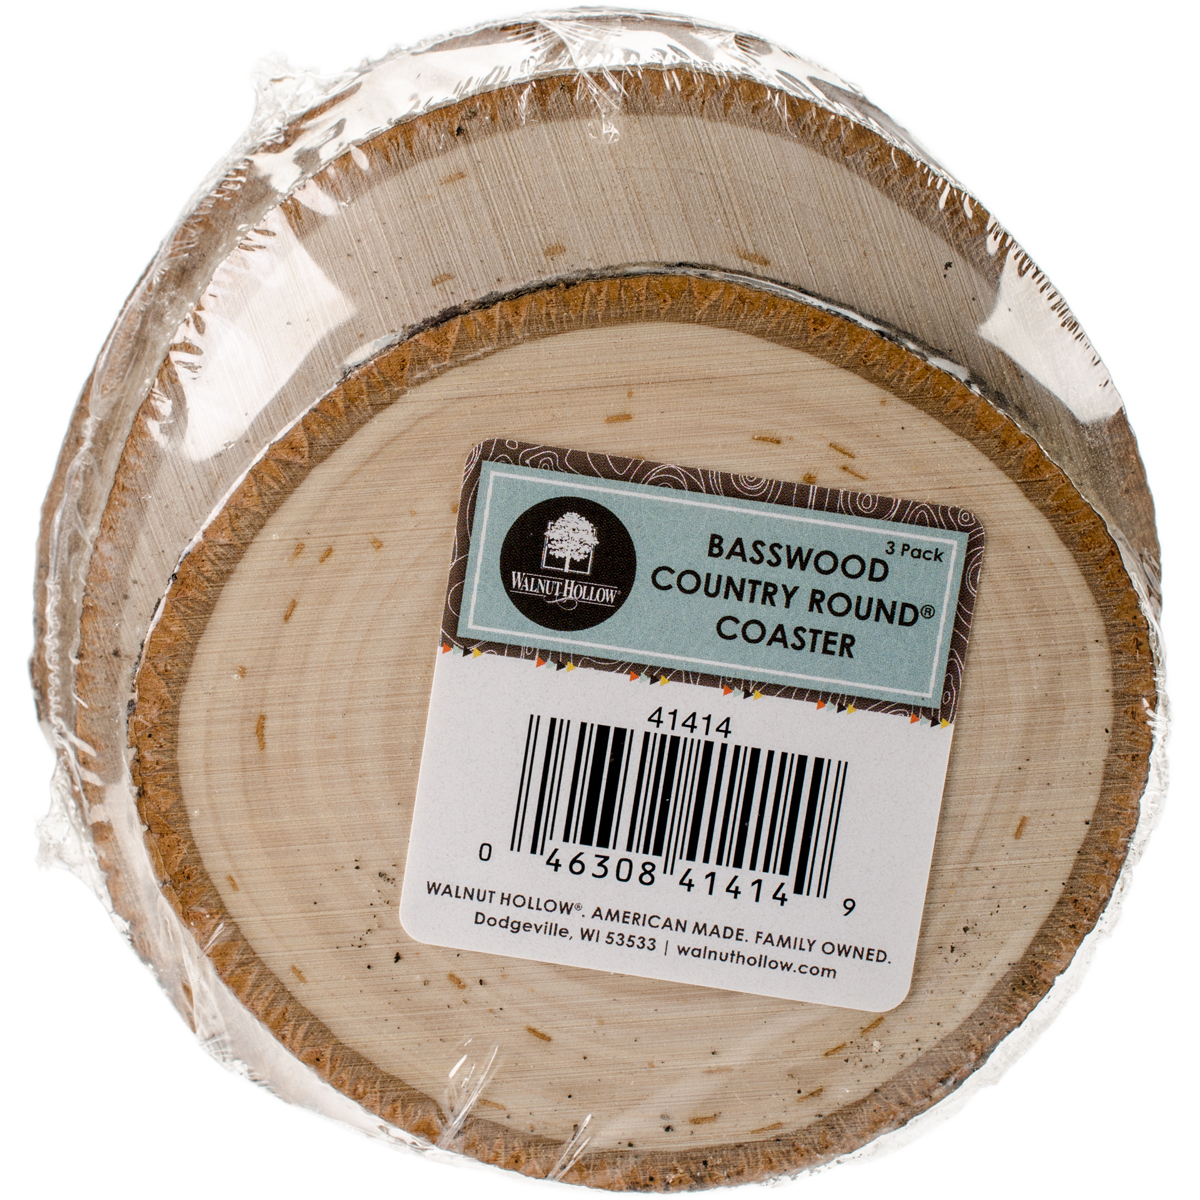 41414 Basswood Country Round Coaster - 3.5 To 4.5 In.